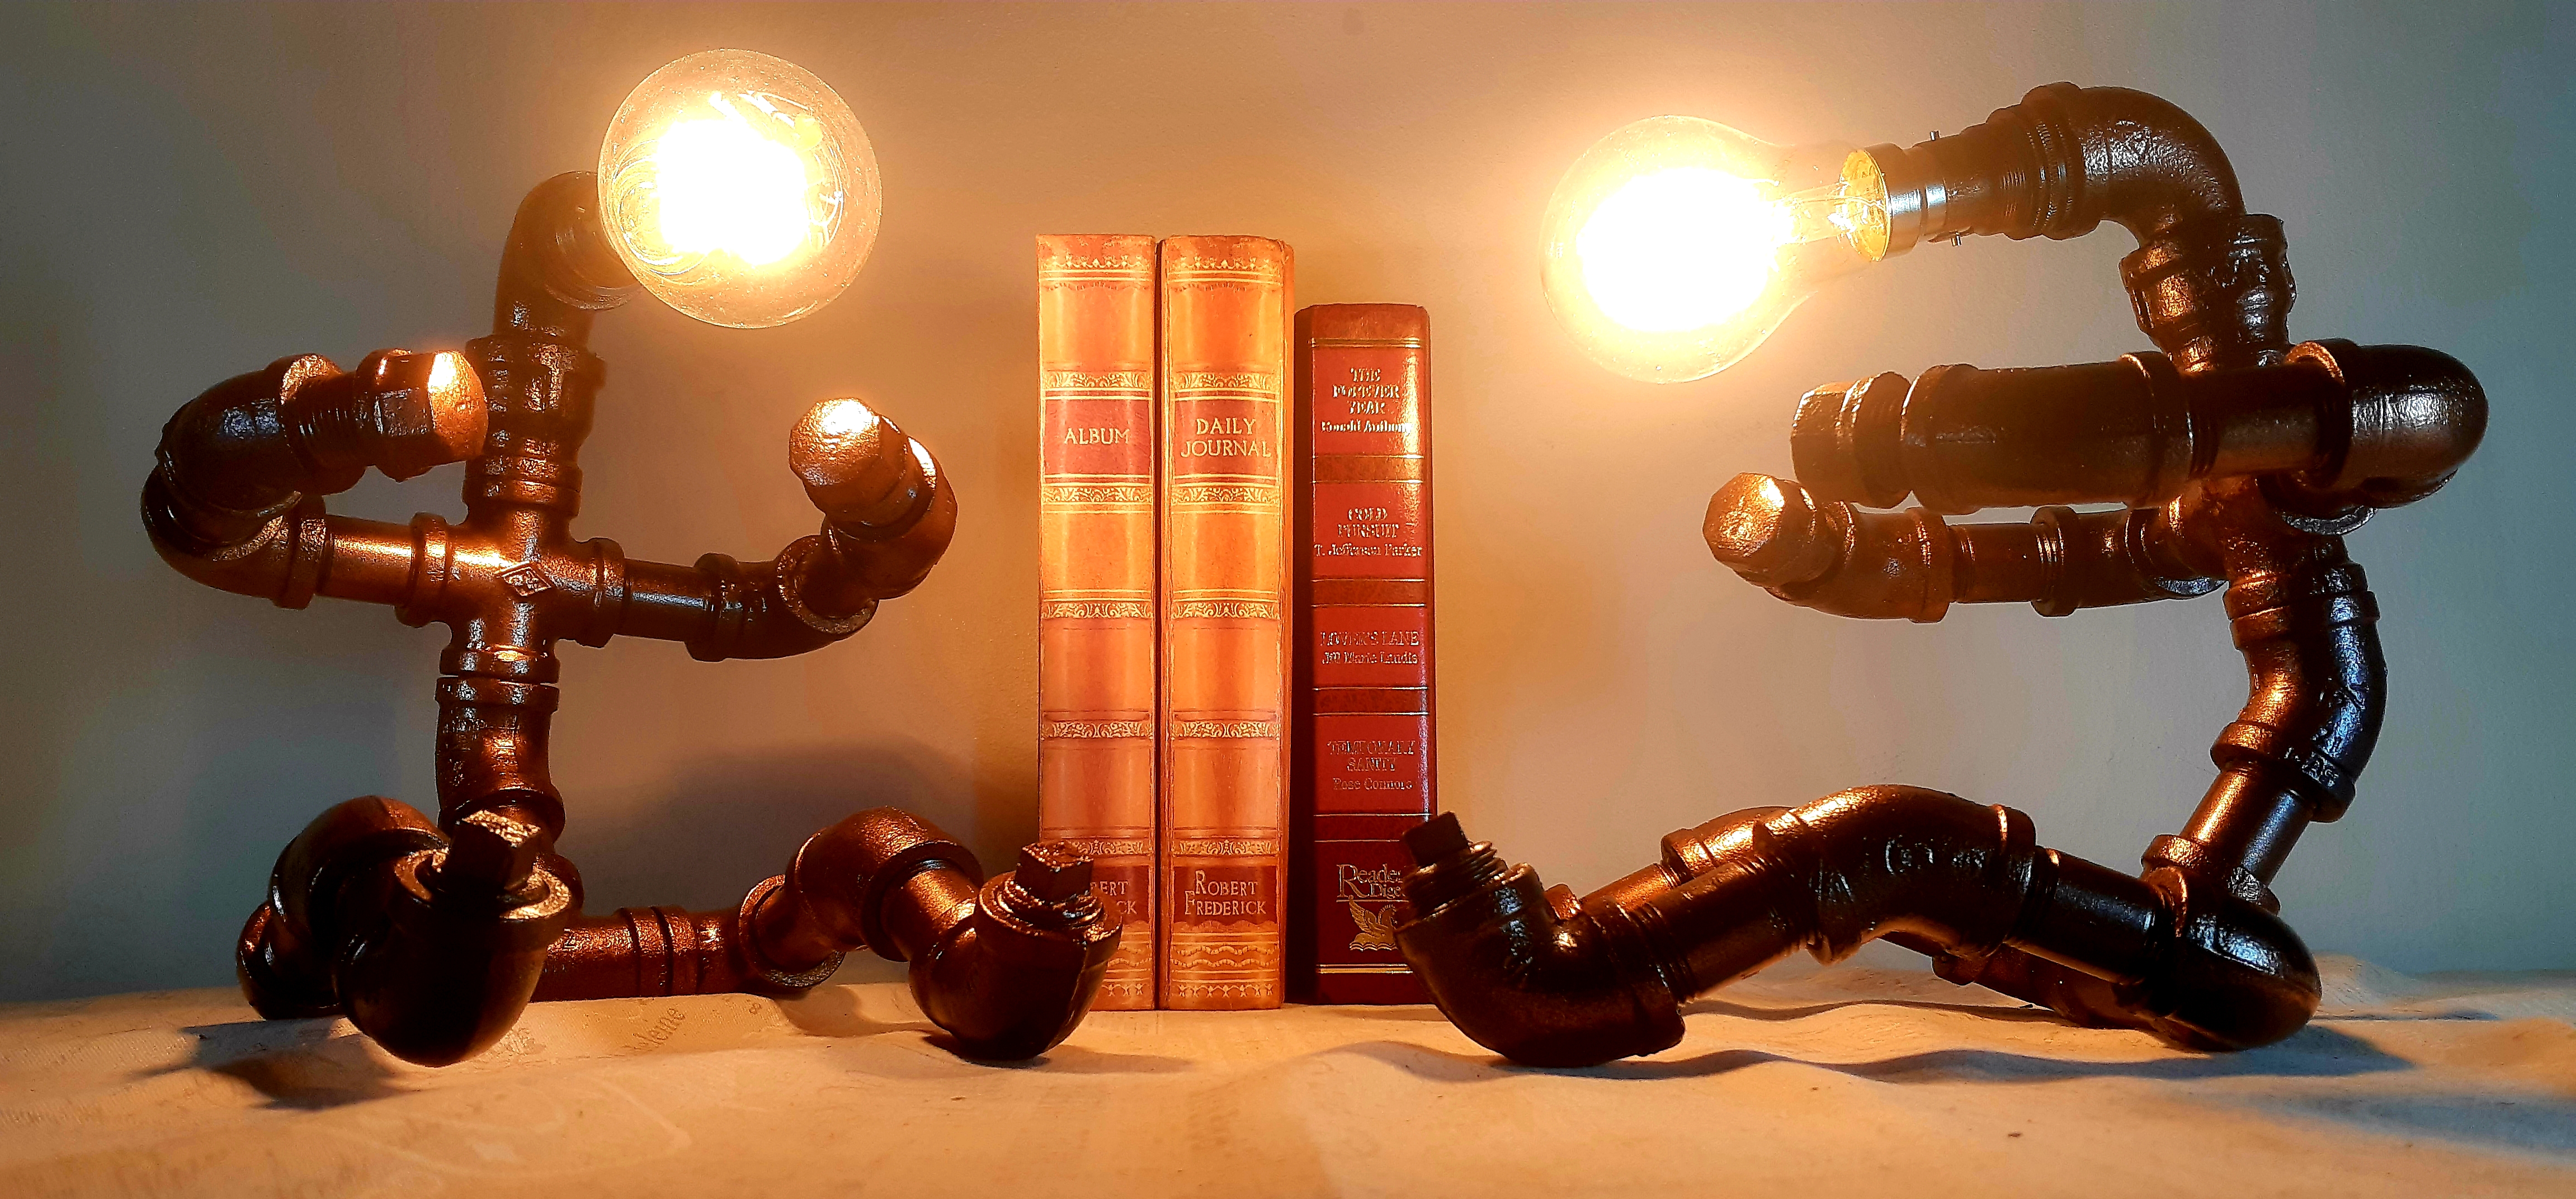 Robot Pipe Lamps